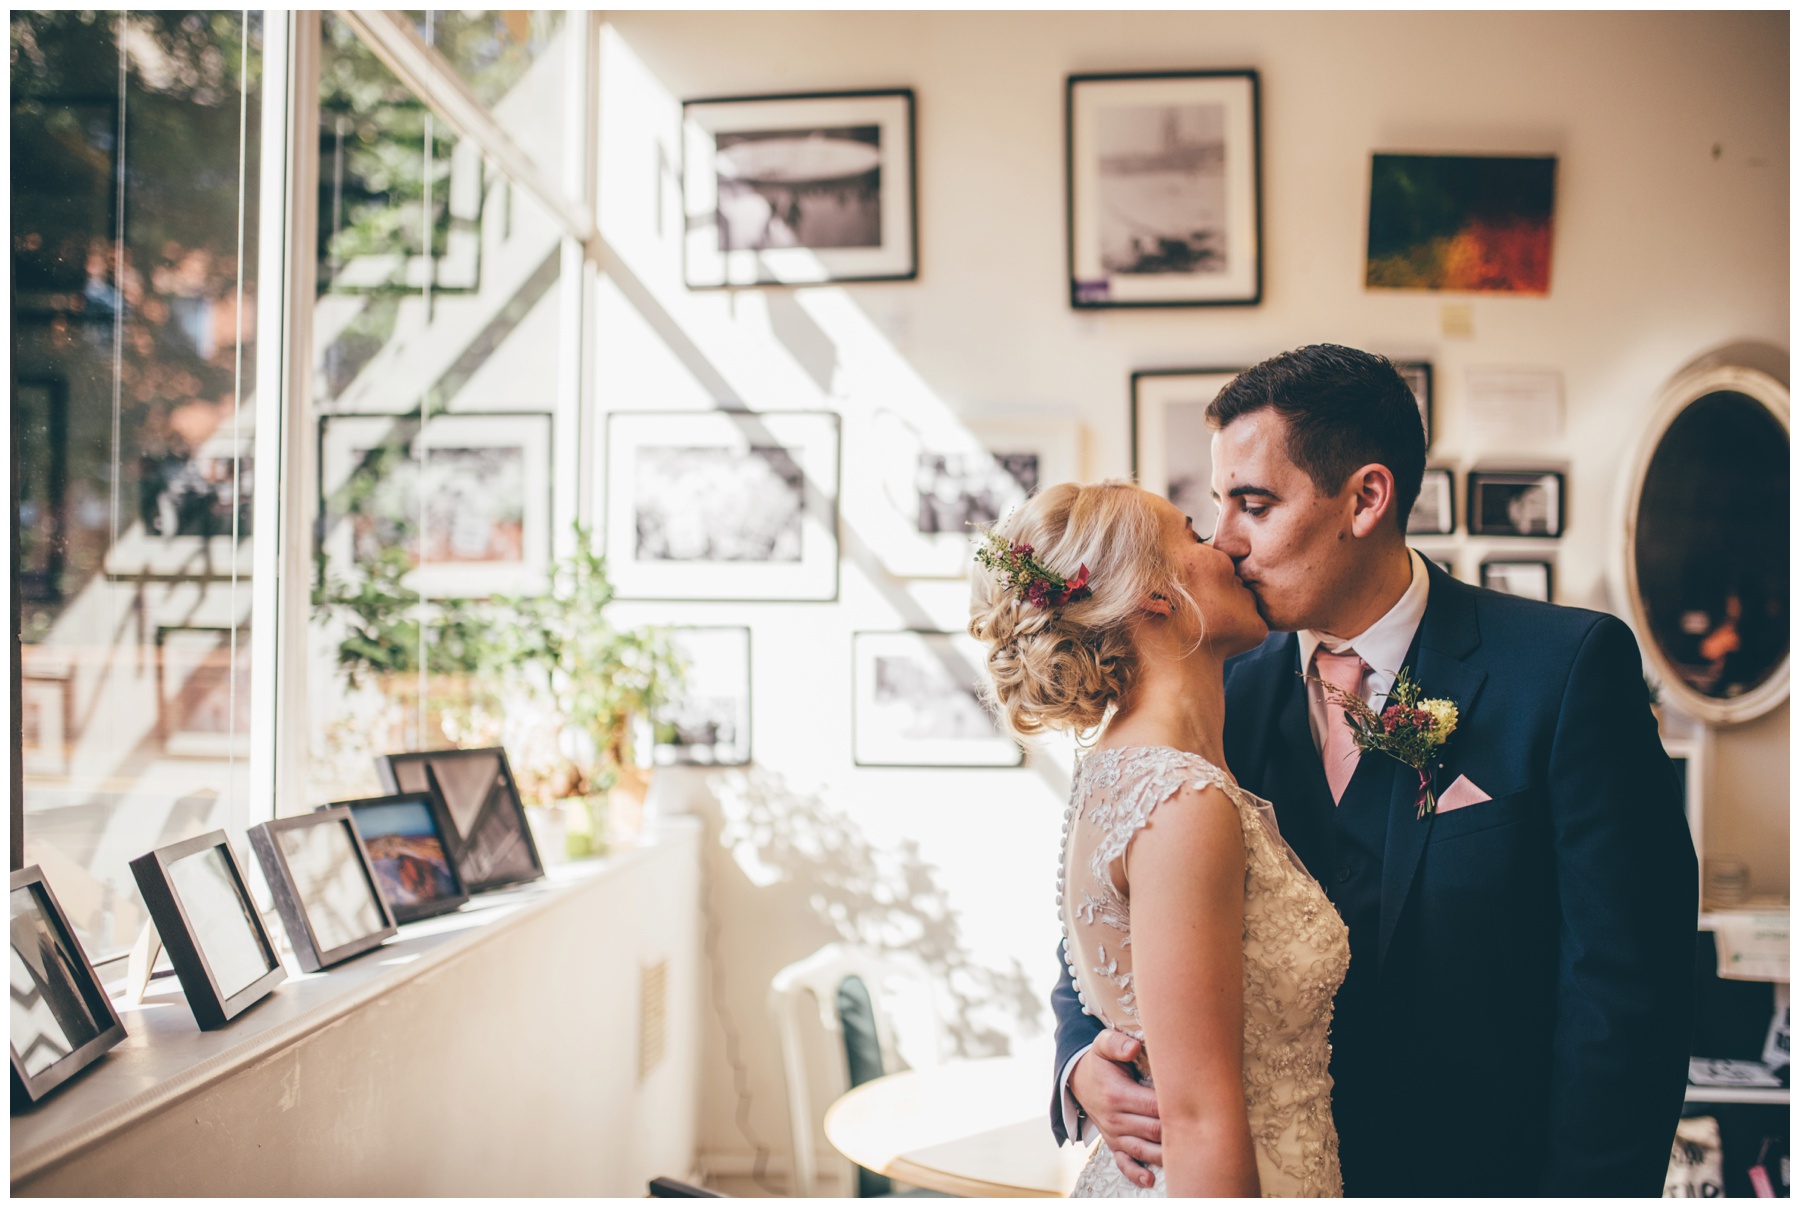 Bride and groom share a kiss in the art gallery of The Hide in Sheffield city centre wedding.